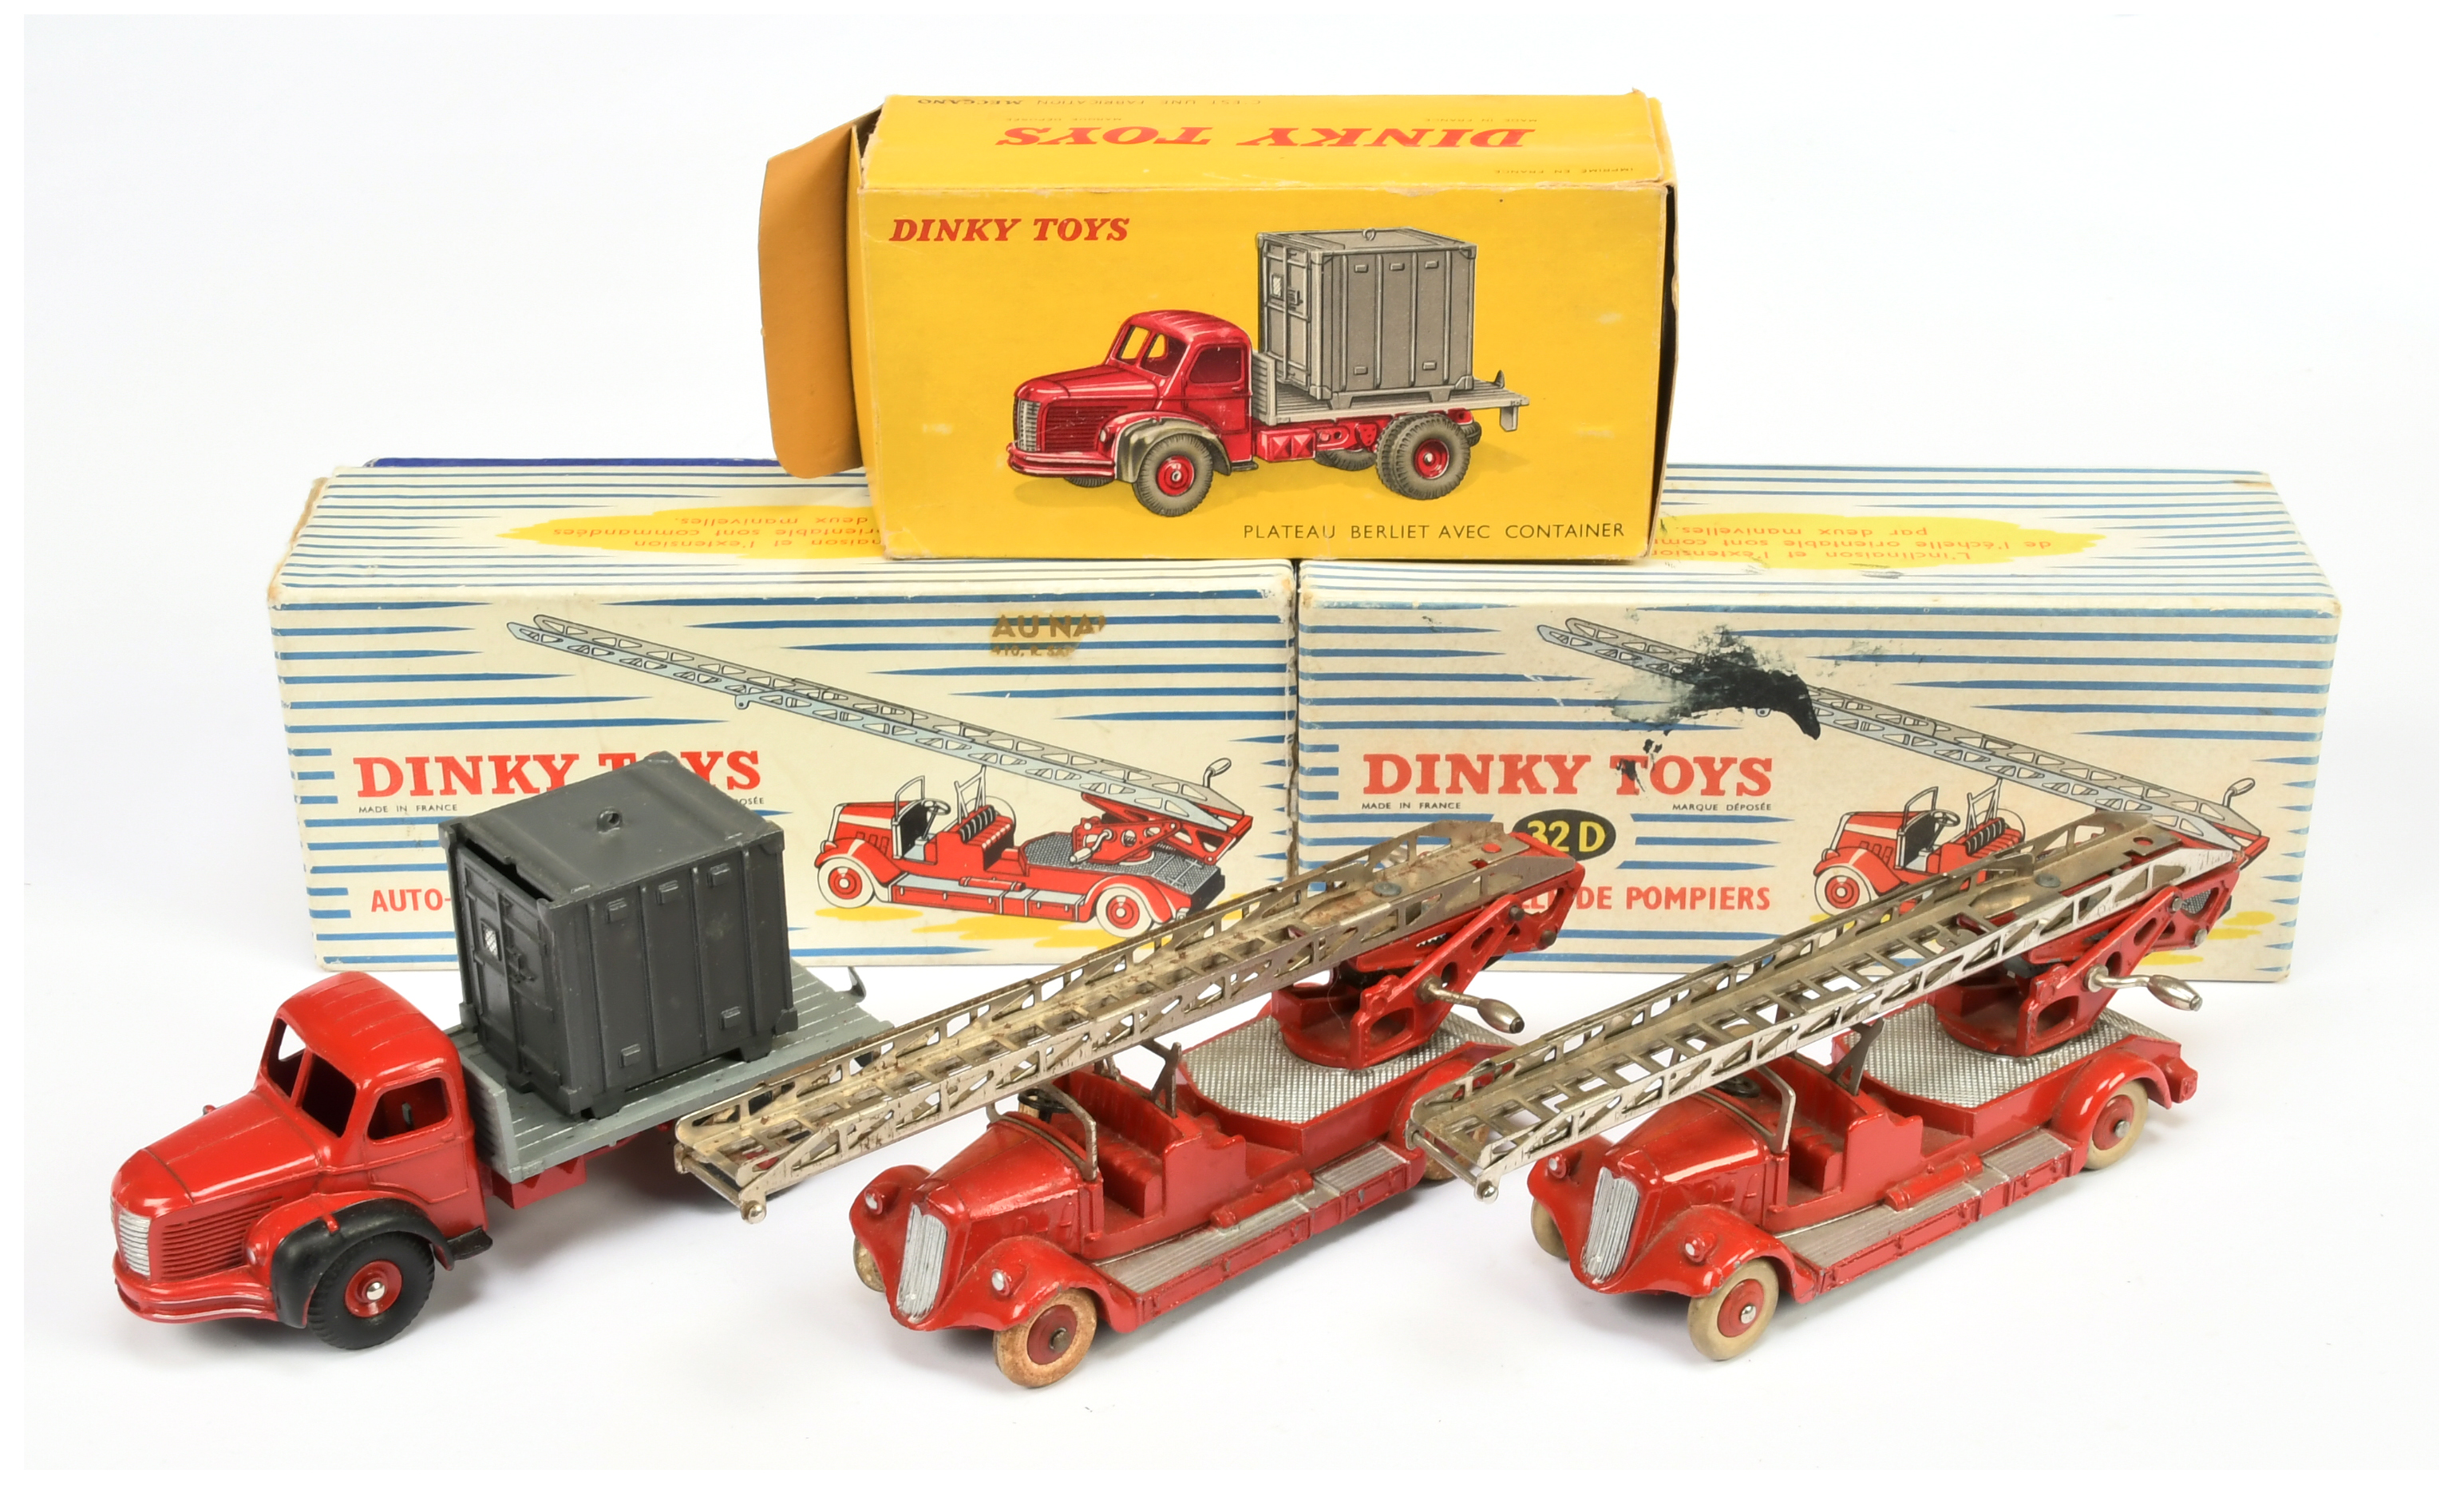 French Dinky Toys 32D Delahaye Auto- Echelle DE Pompiers (A Pair) - Red including convex hubs wit...